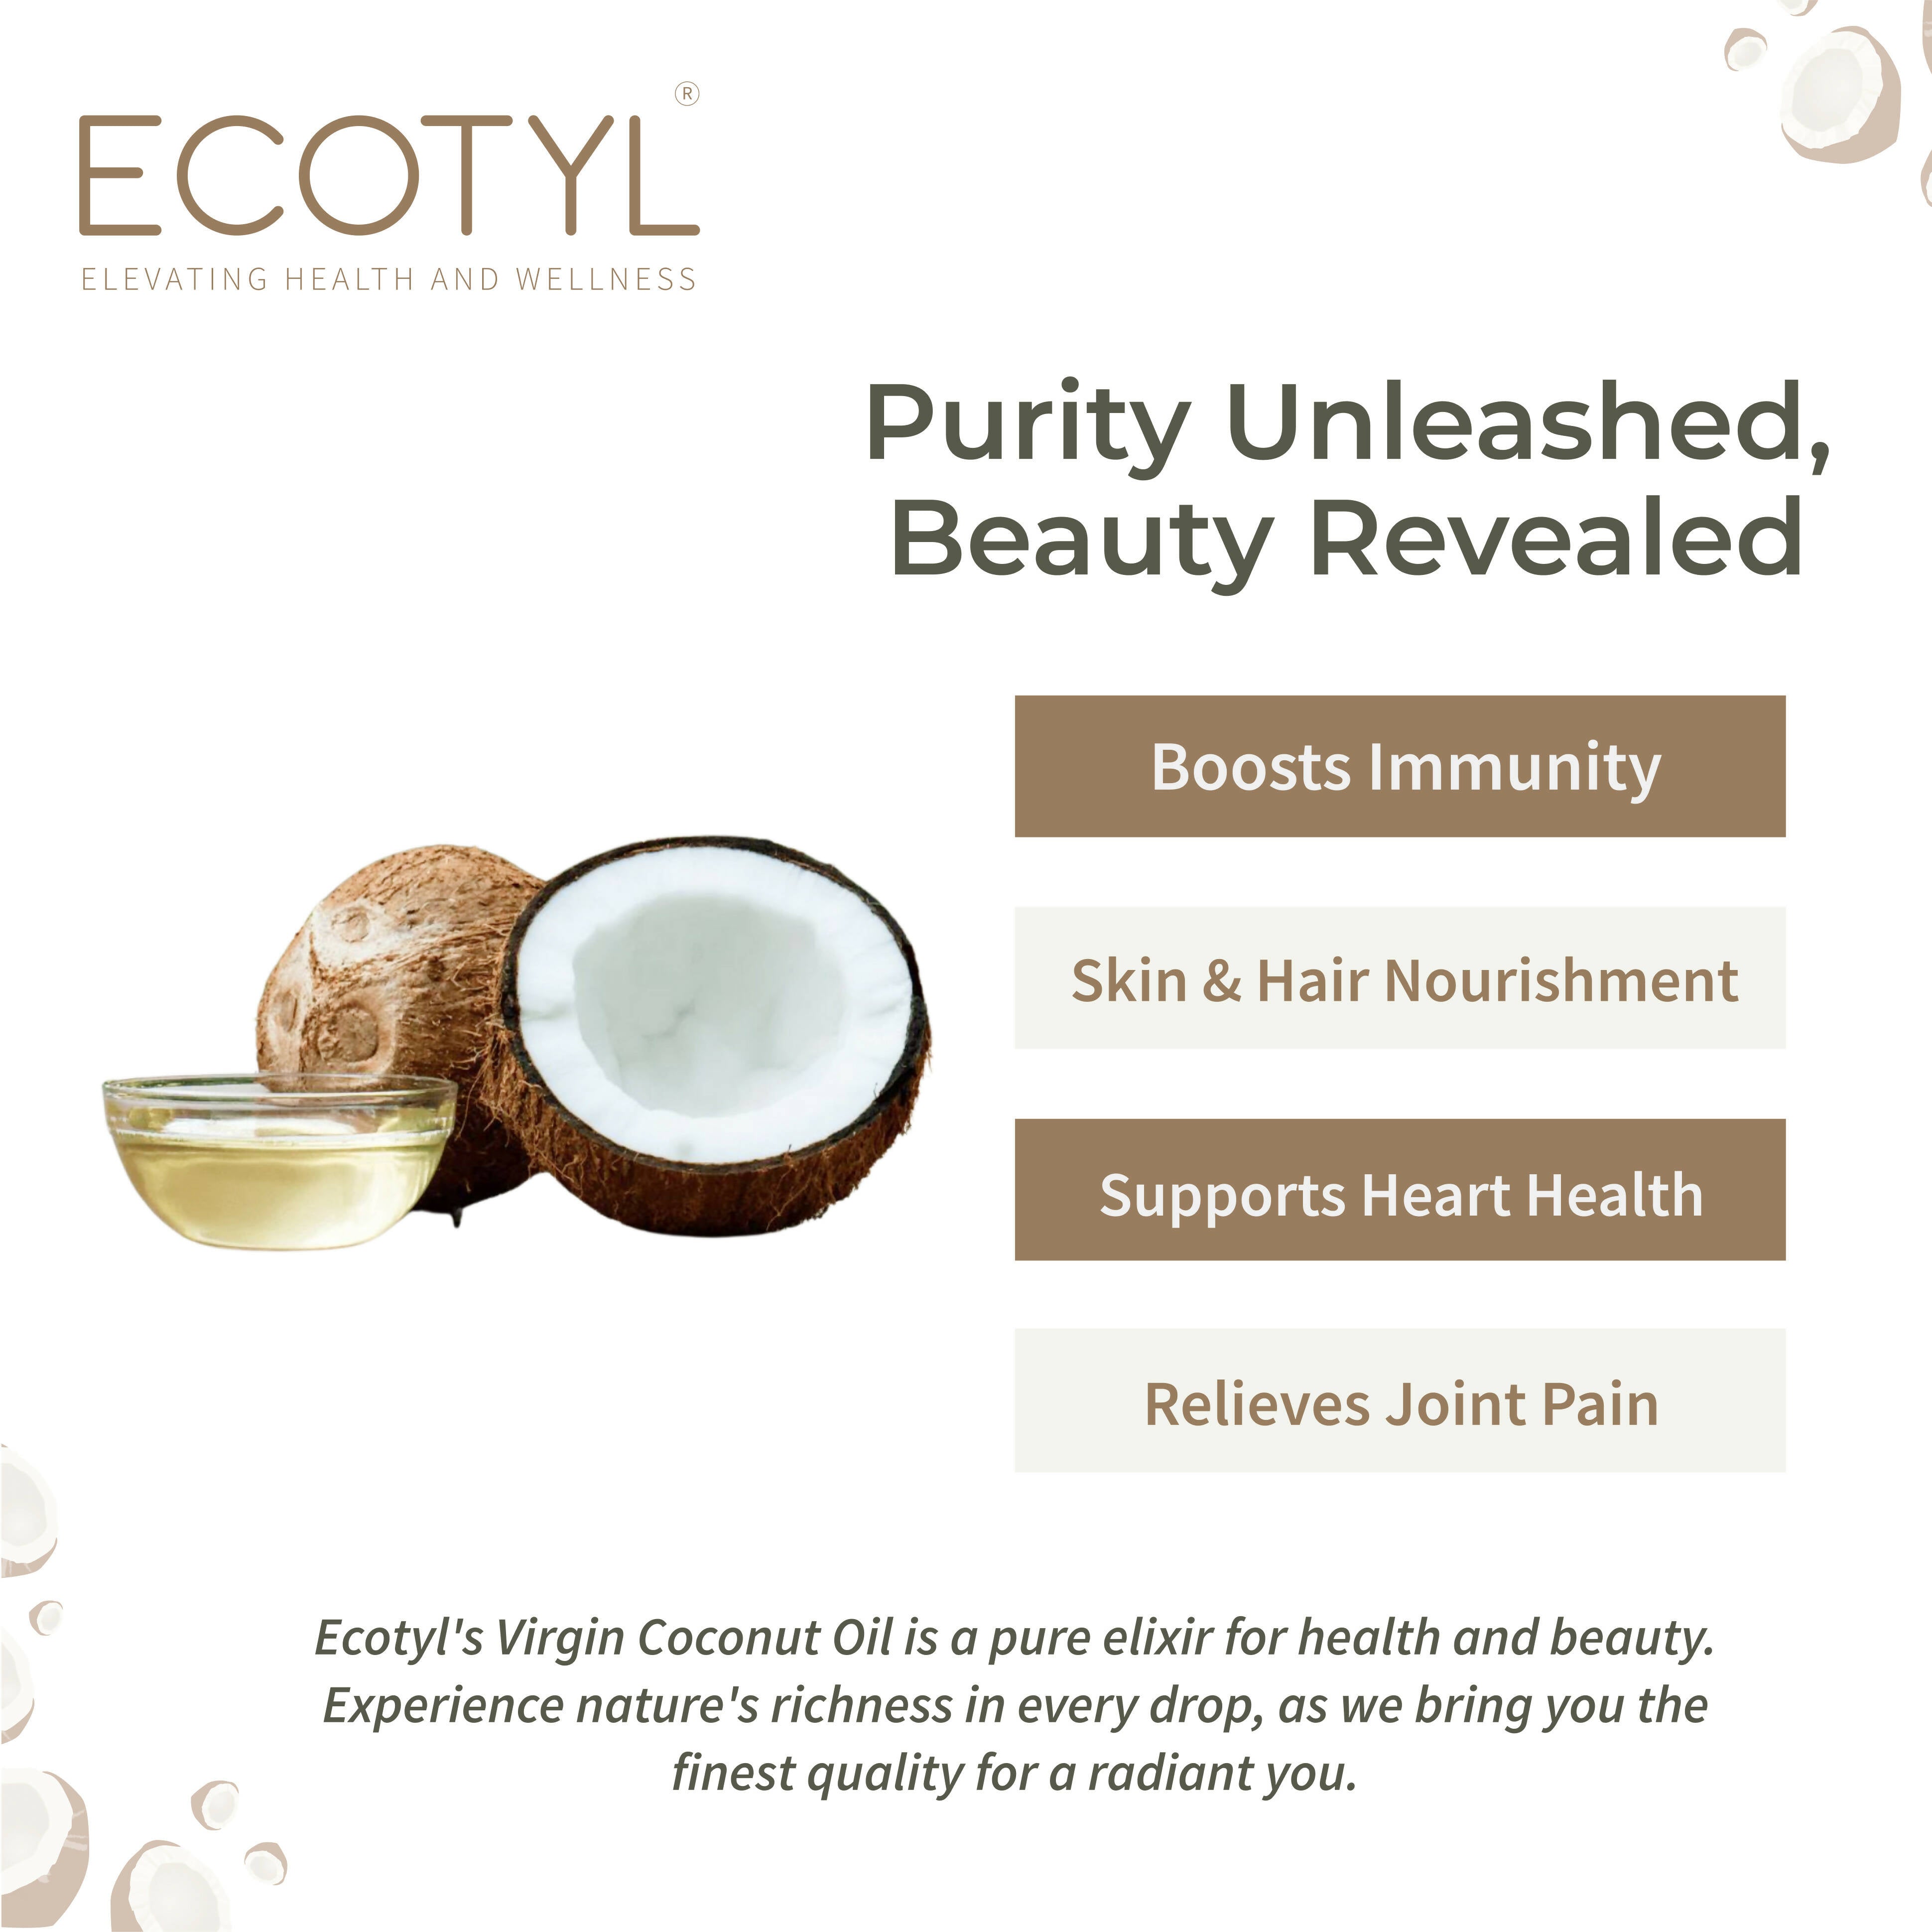 Ecotyl Cold-Pressed Virgin Coconut Oil | Kachi Ghani | Suitable for Cooking | 500ml